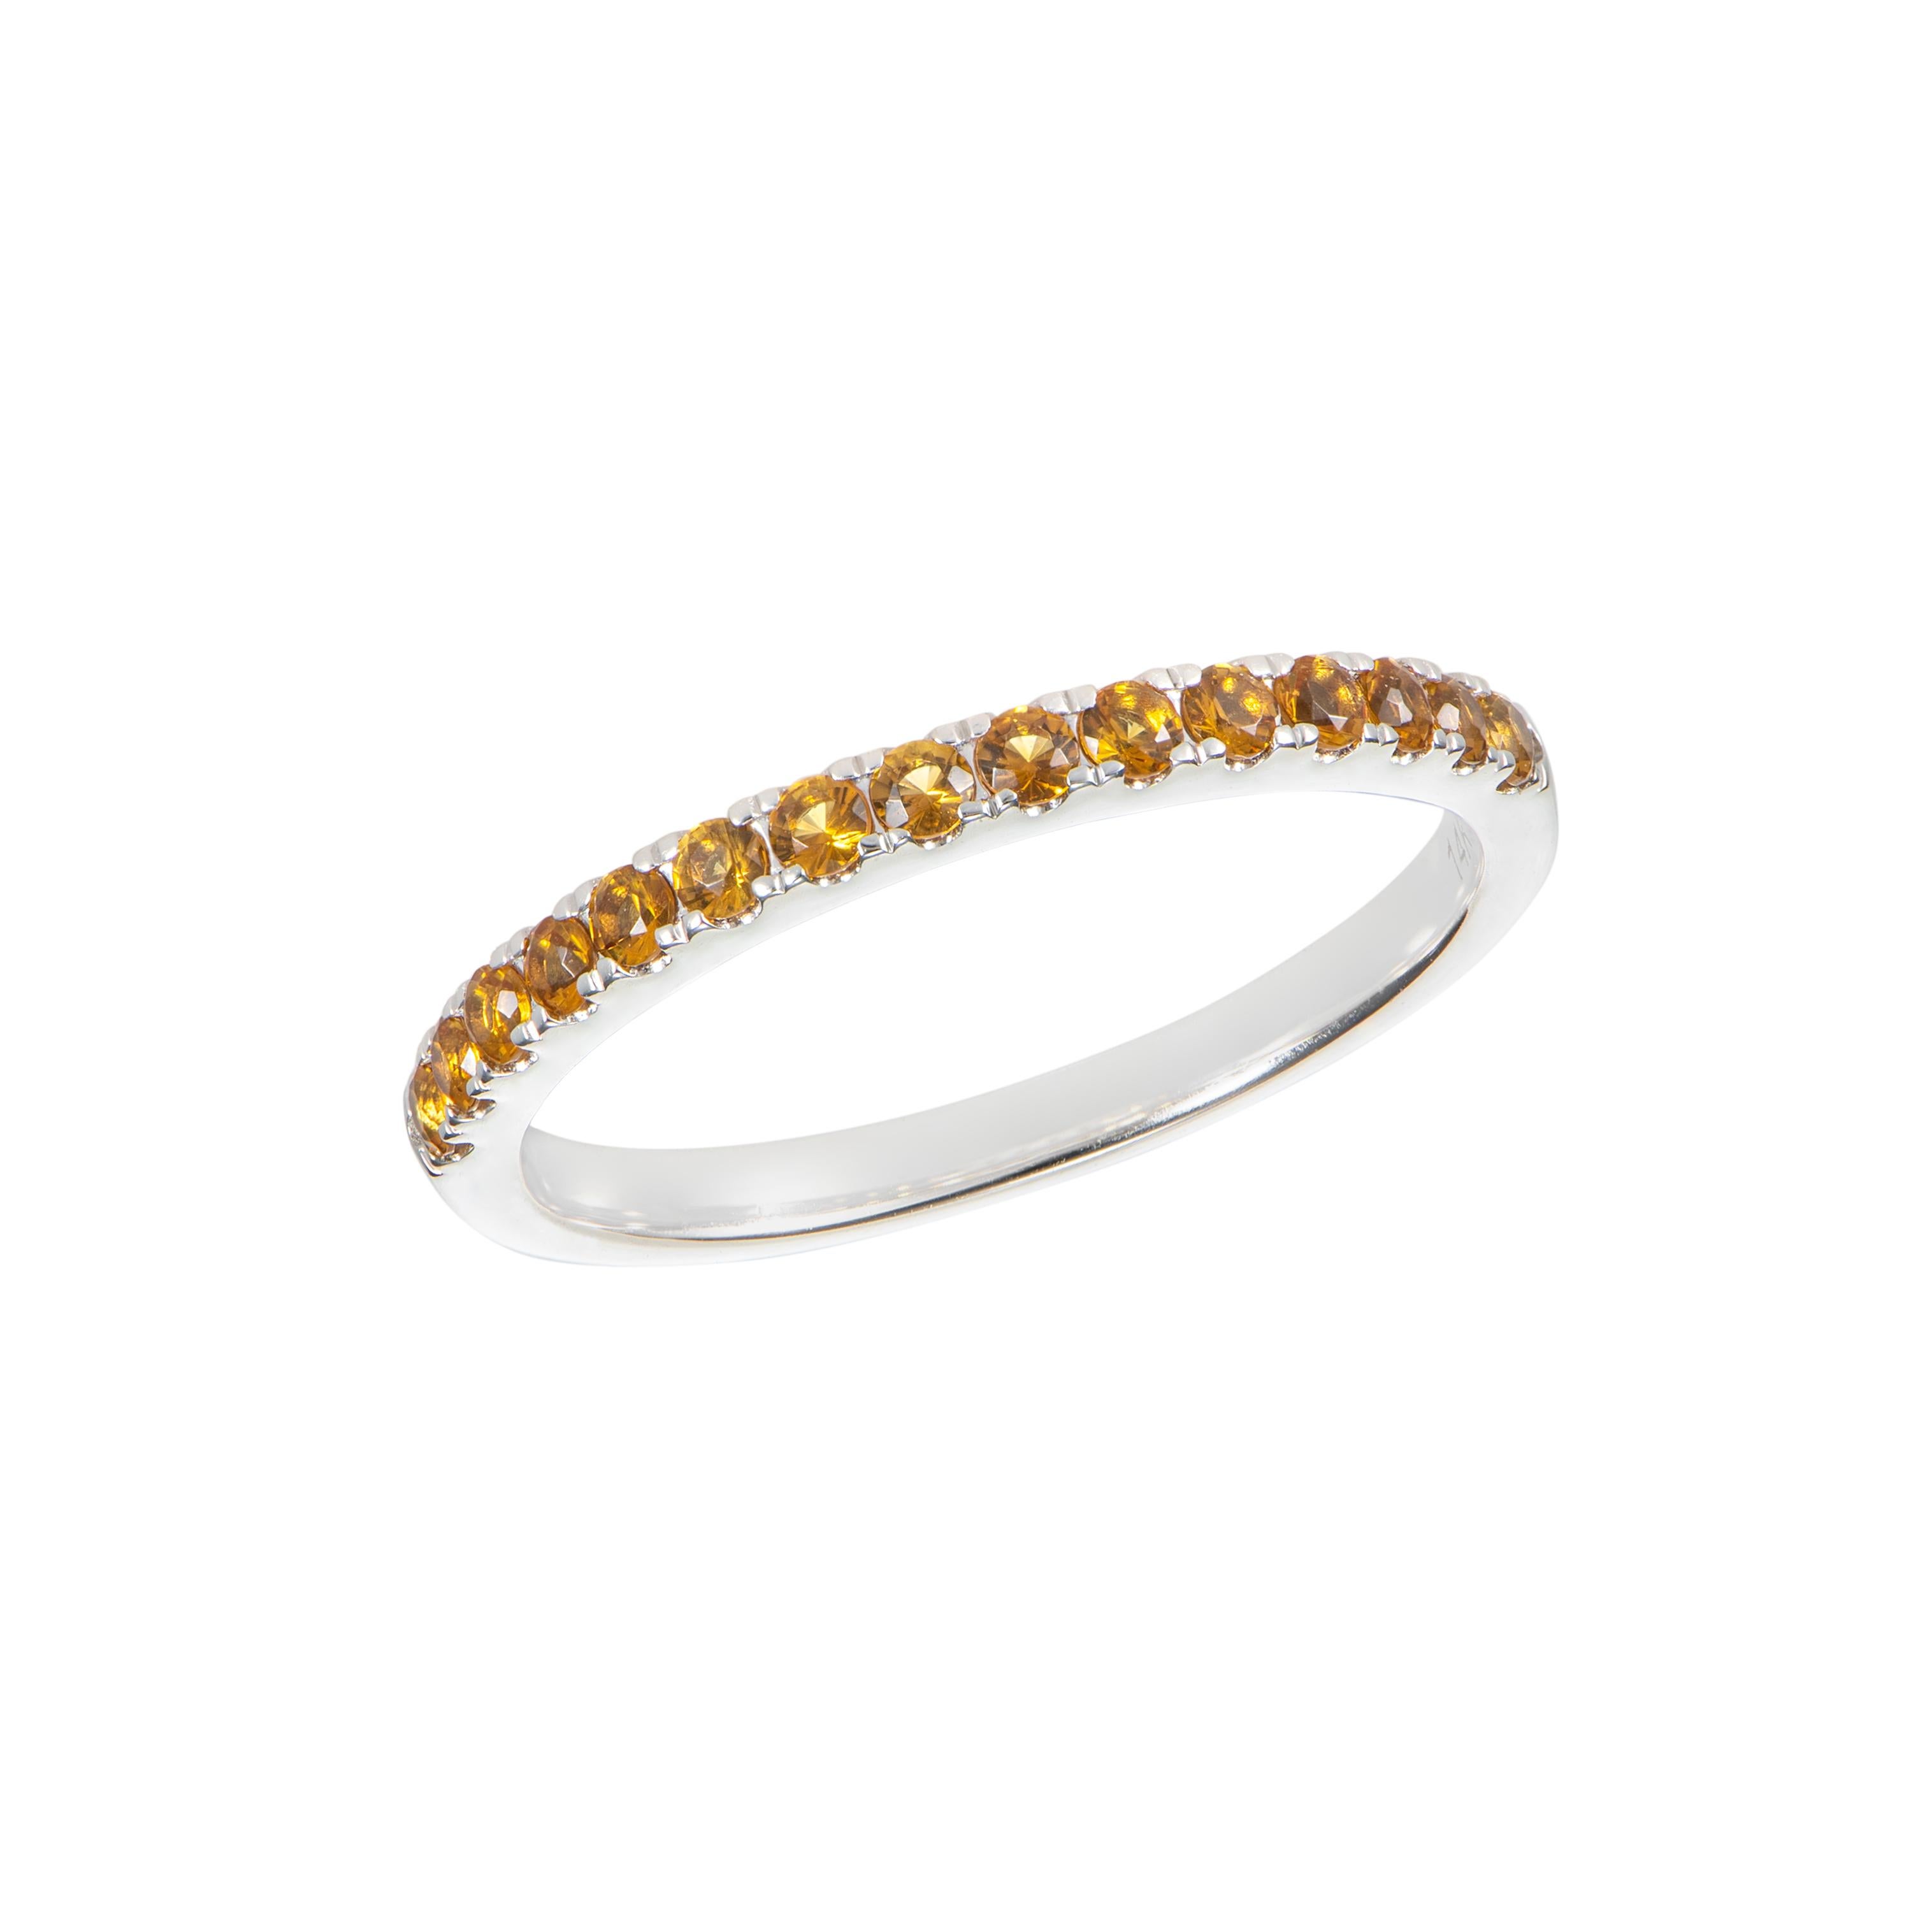 Sunita Nahata presents a collection of simple, classic and Eternity Rings. Wear it as an everyday ring or stack it with other rings to create an entirely different look. For the woman who appreciates quality, the eternity ring collection by Precious